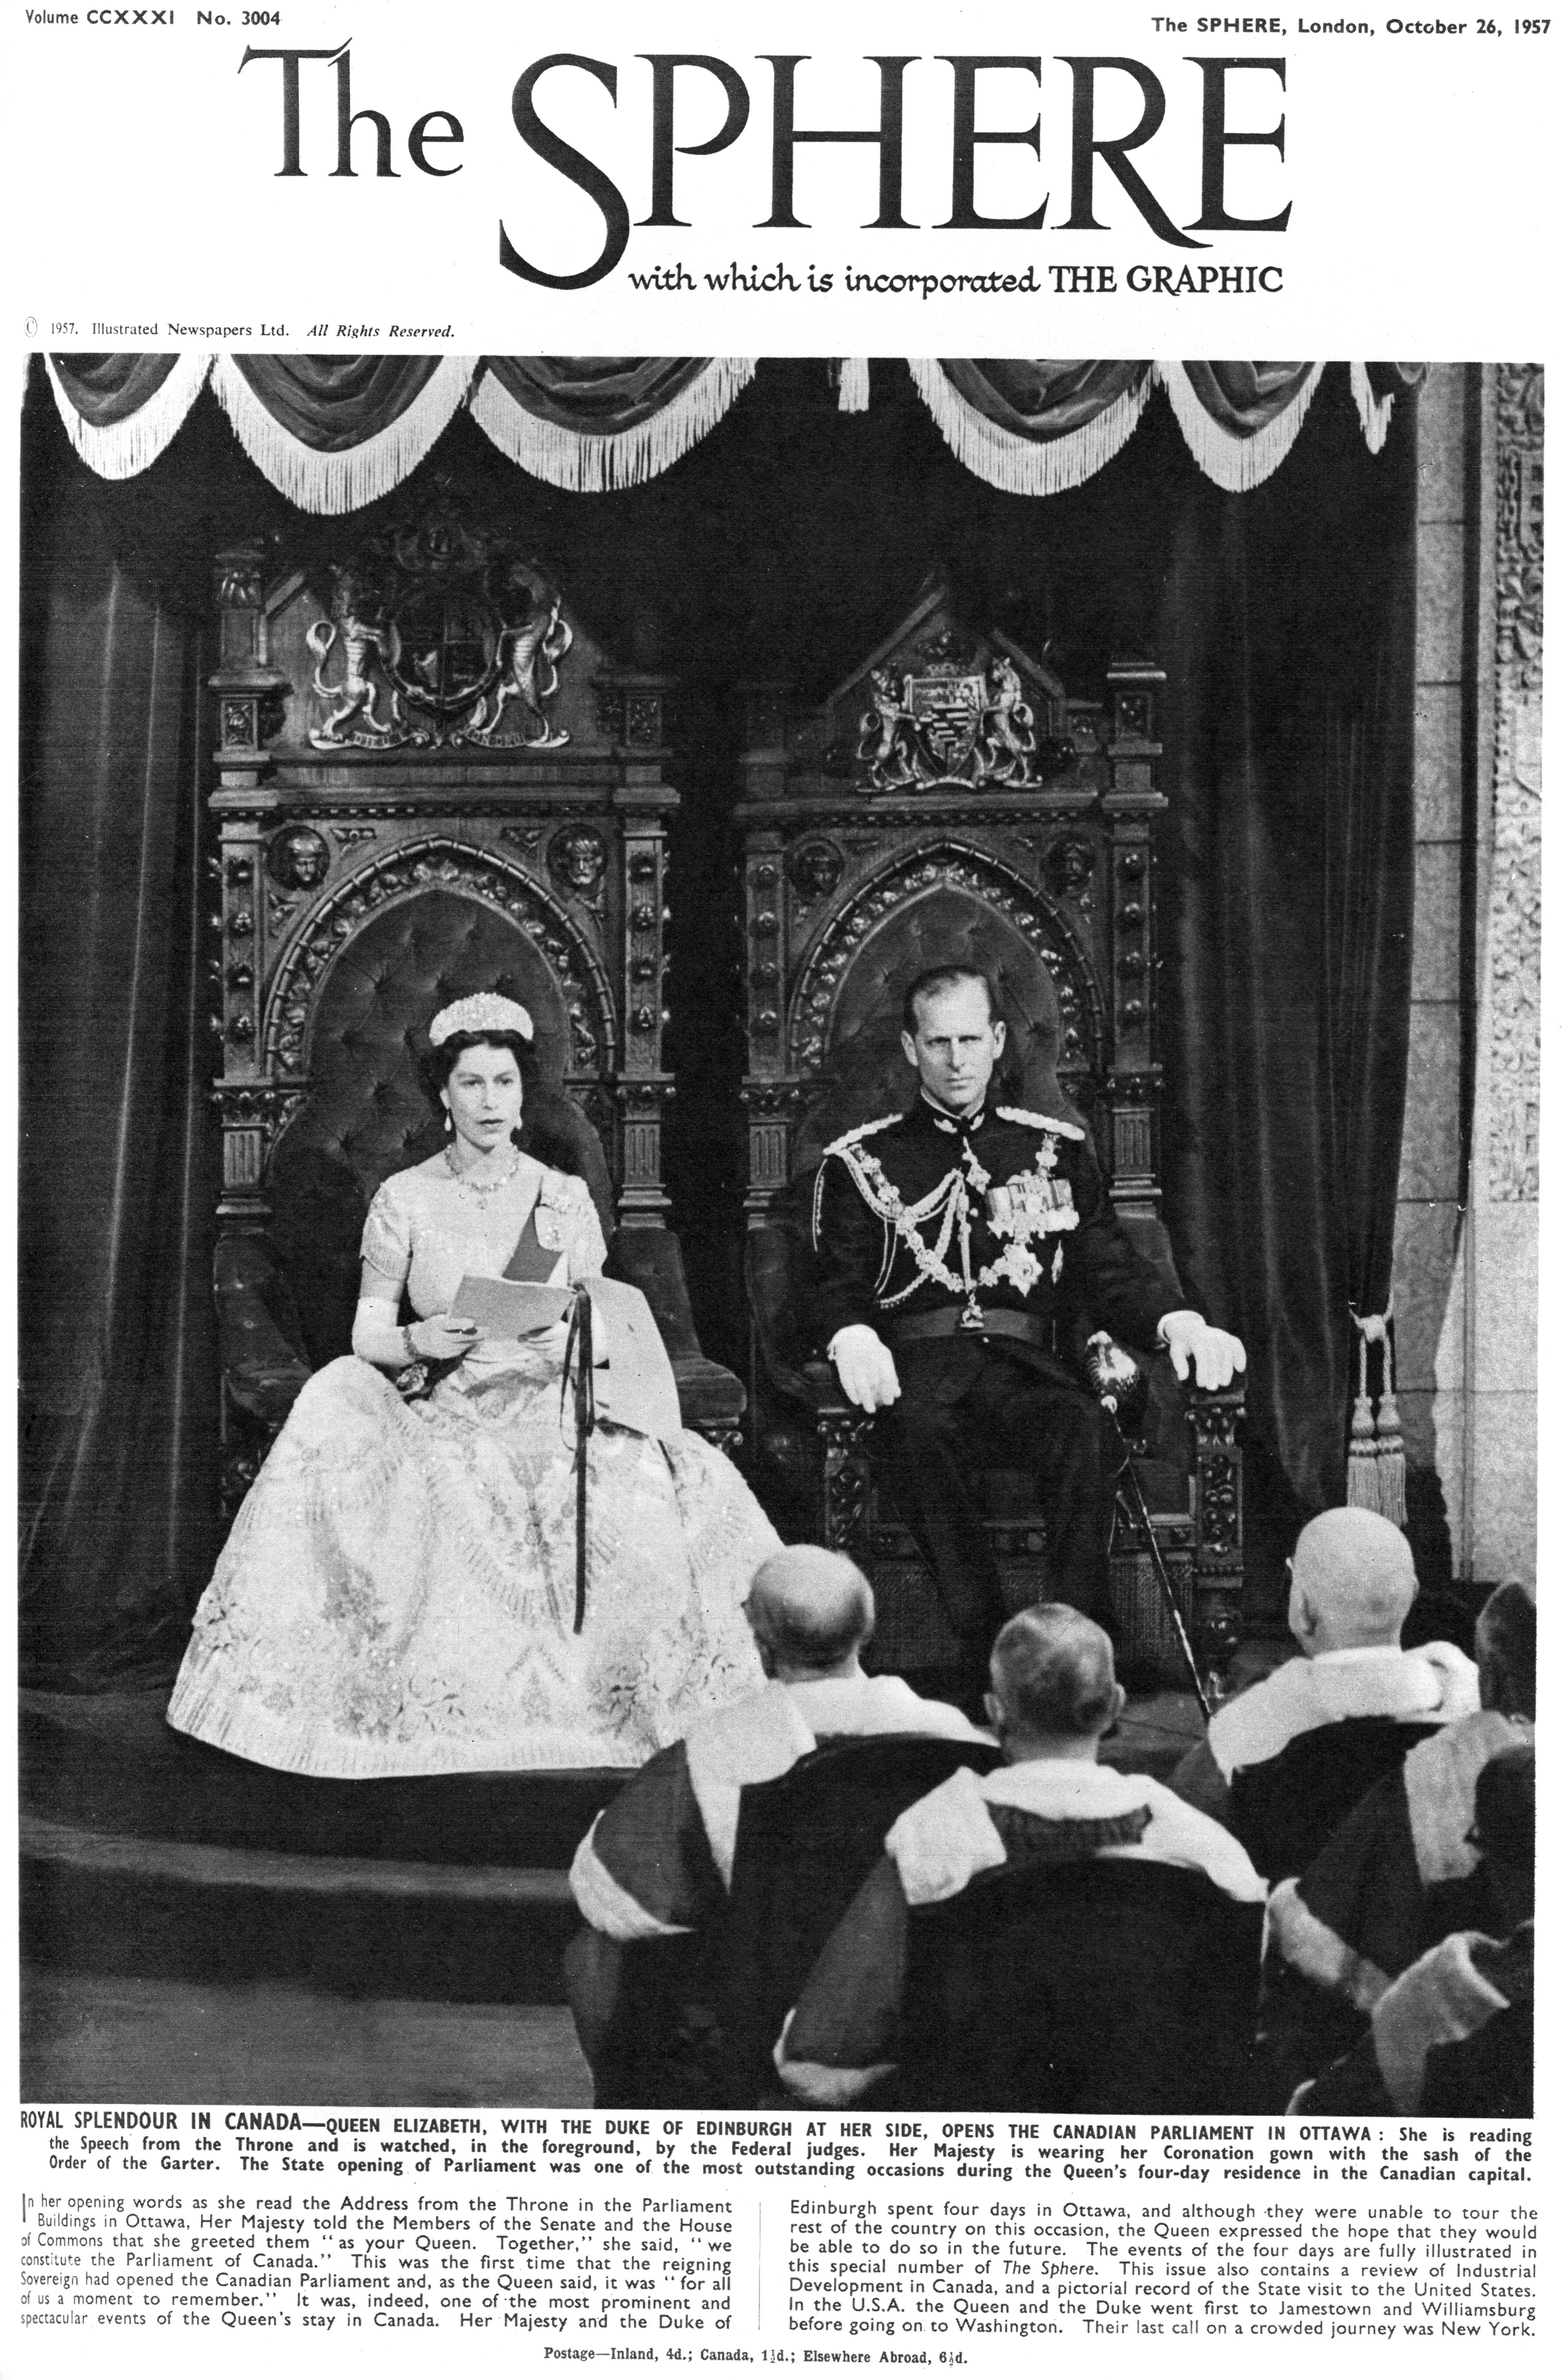 First Anniversary The Queen’s Death - Queen Elizabeth and the Duke of Edinburgh open the Canadian parliament in Ottawa in 1957